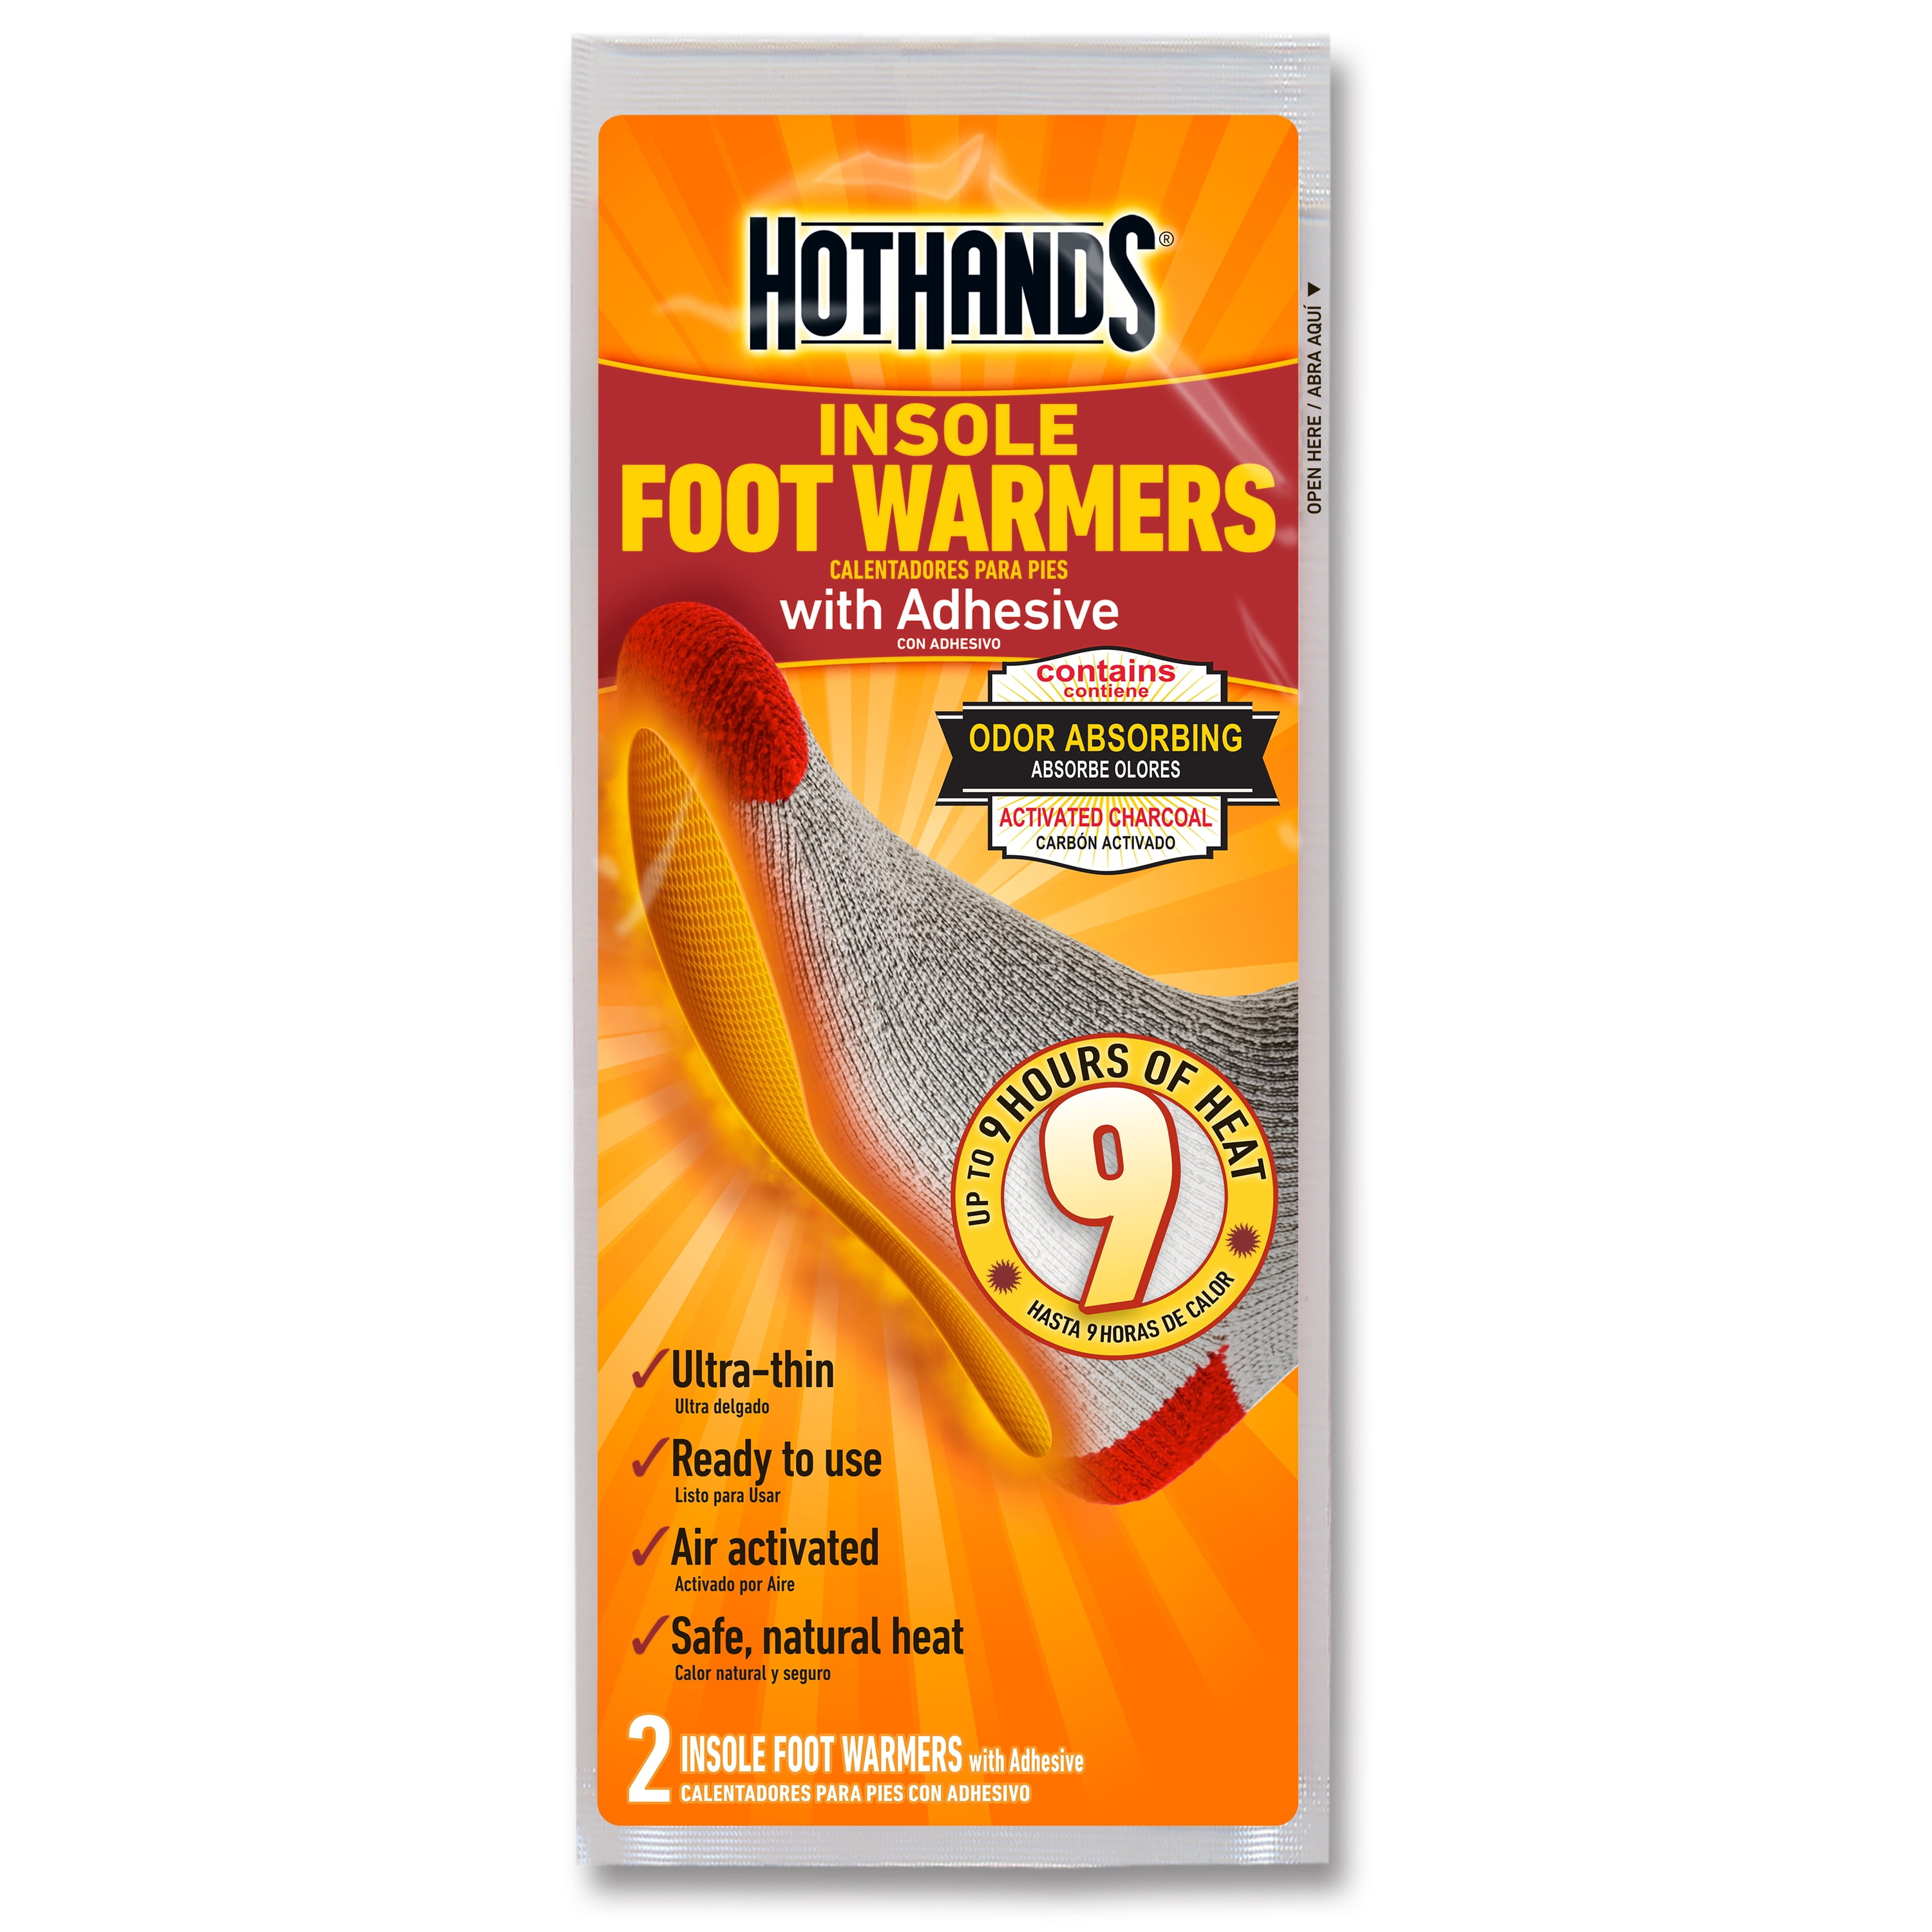 HotHands Toe Warmers 14 Pair